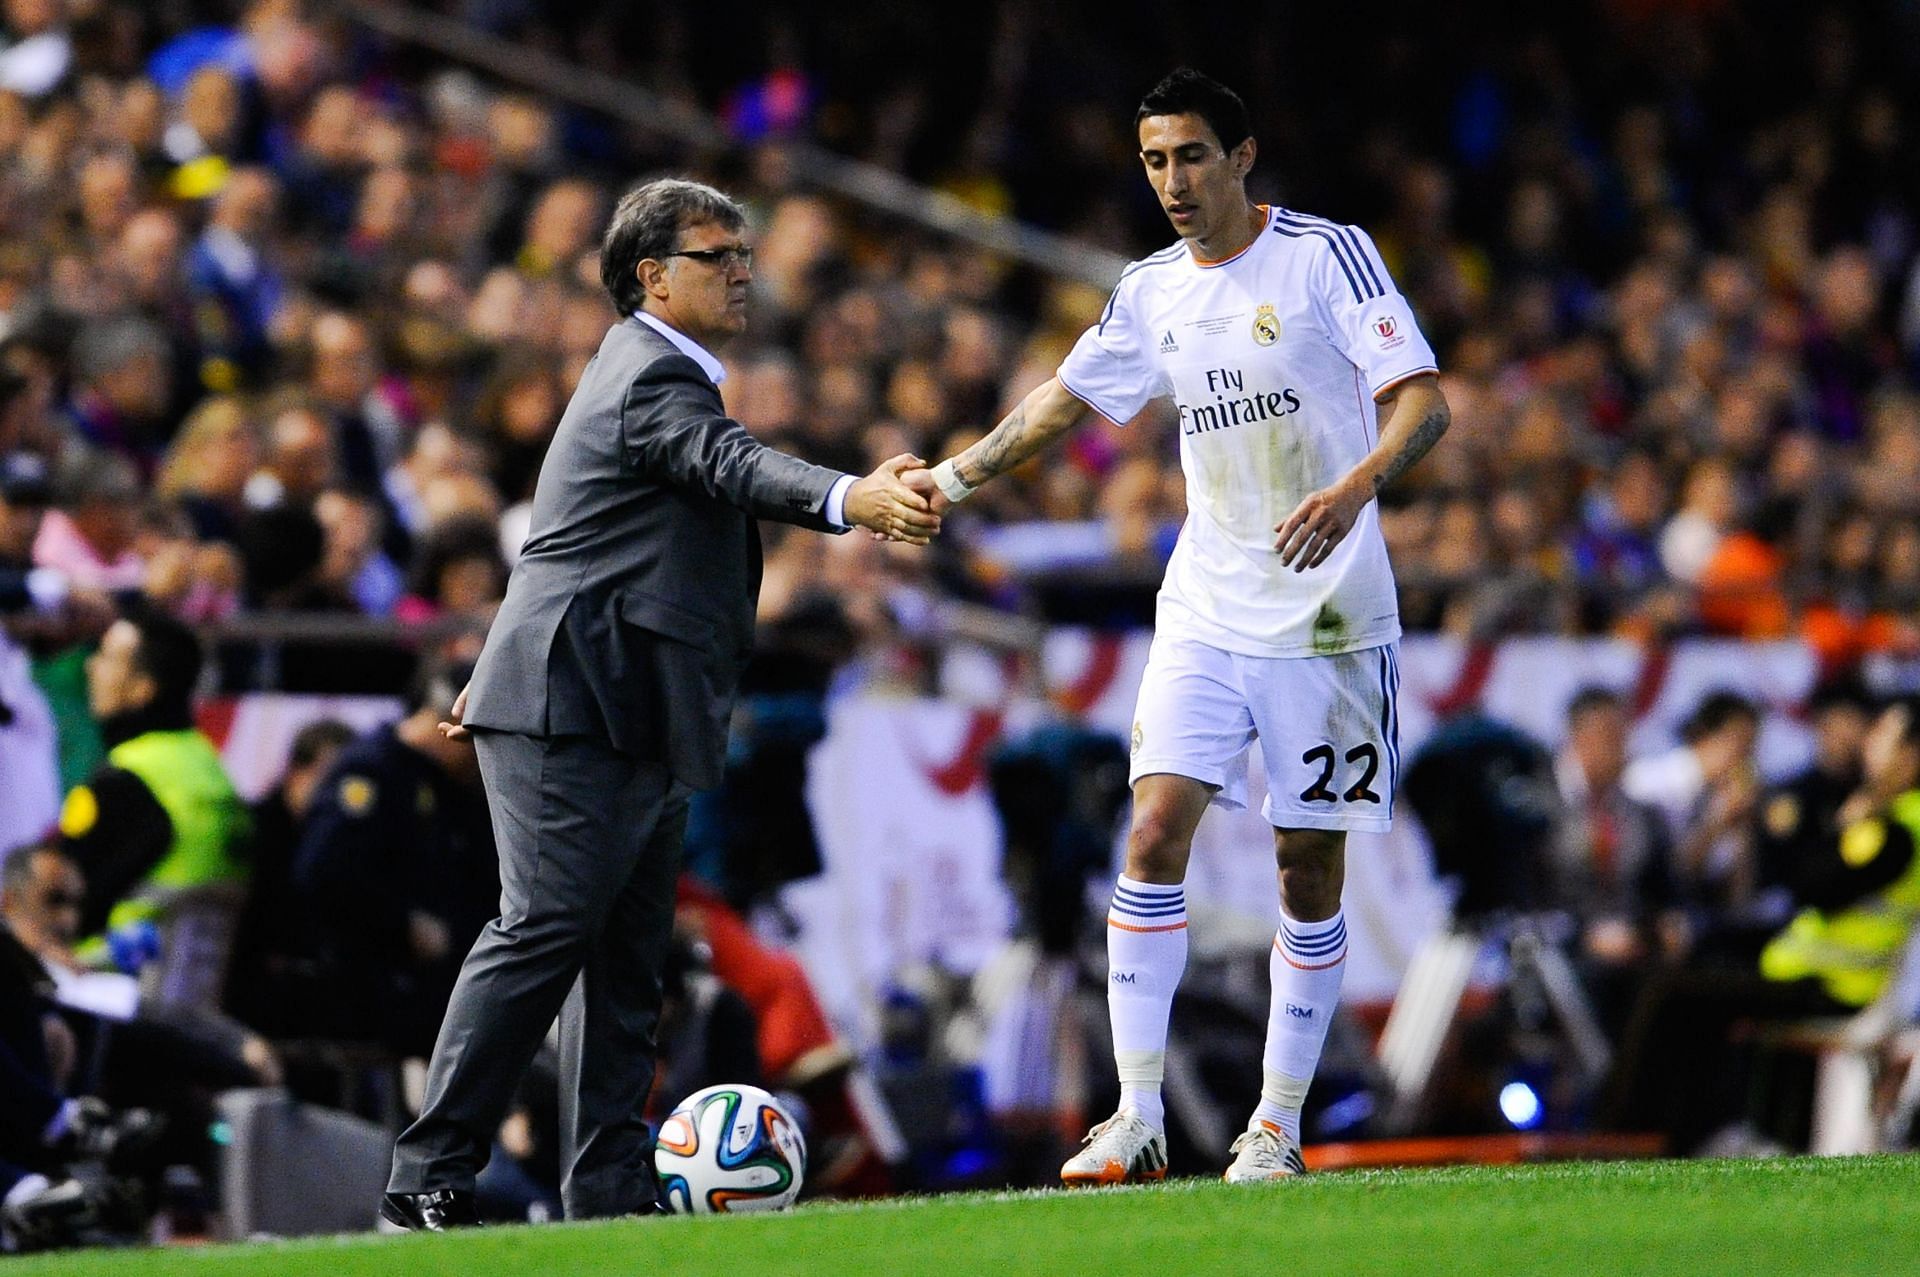 Di Maria has played for both Manchester United and Real Madrid